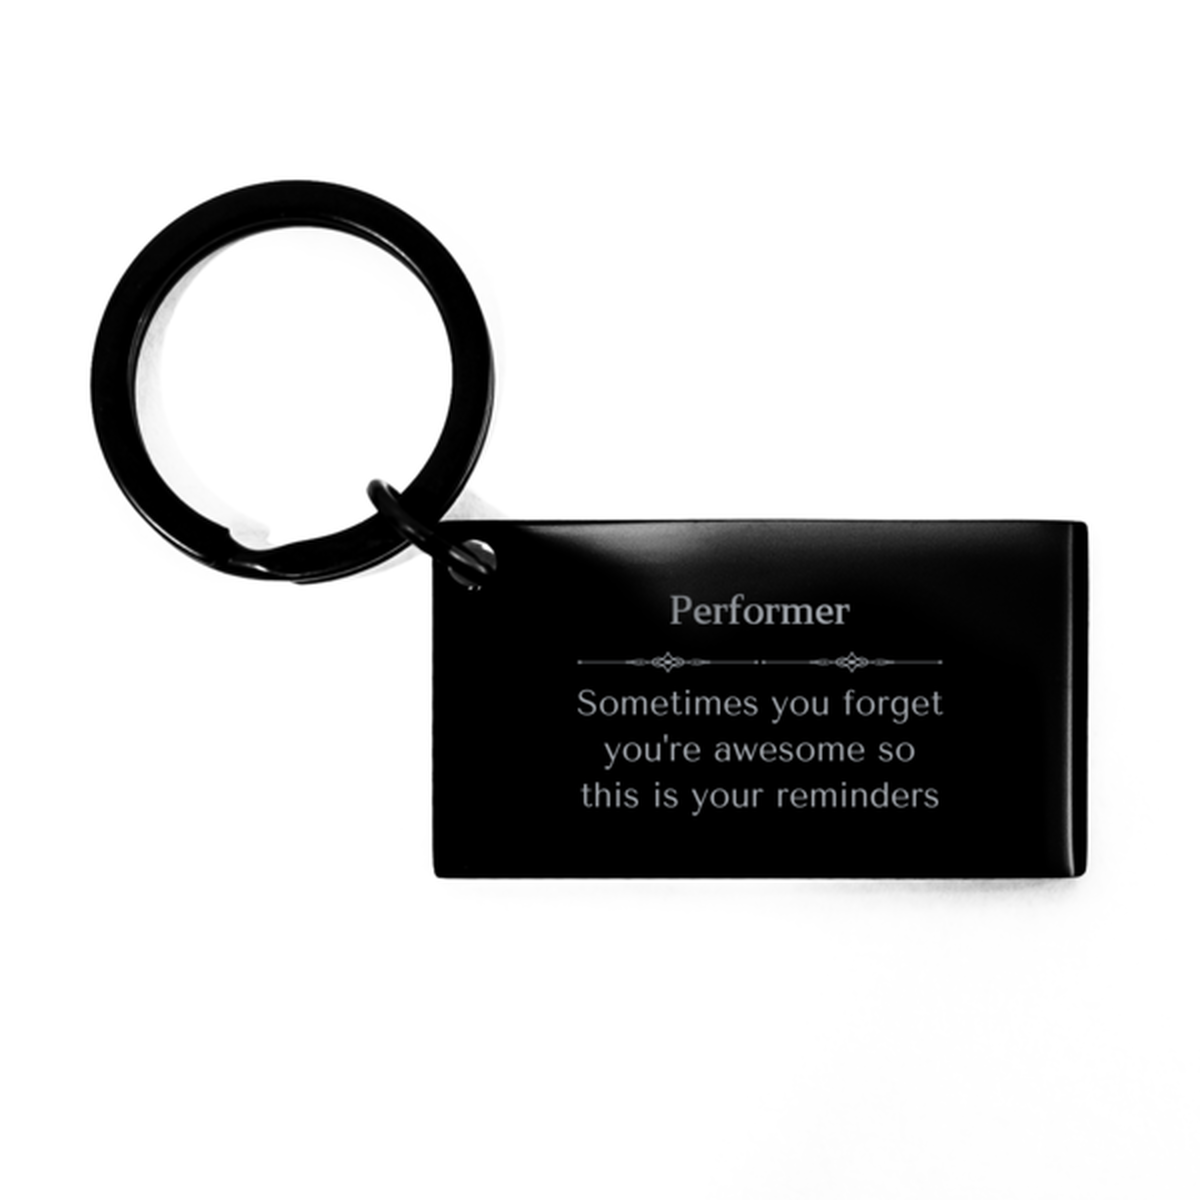 Sentimental Performer Keychain, Real Estate Investor Sometimes you forget you're awesome so this is your reminders, Graduation Christmas Birthday Gifts for Performer, Men, Women, Coworkers